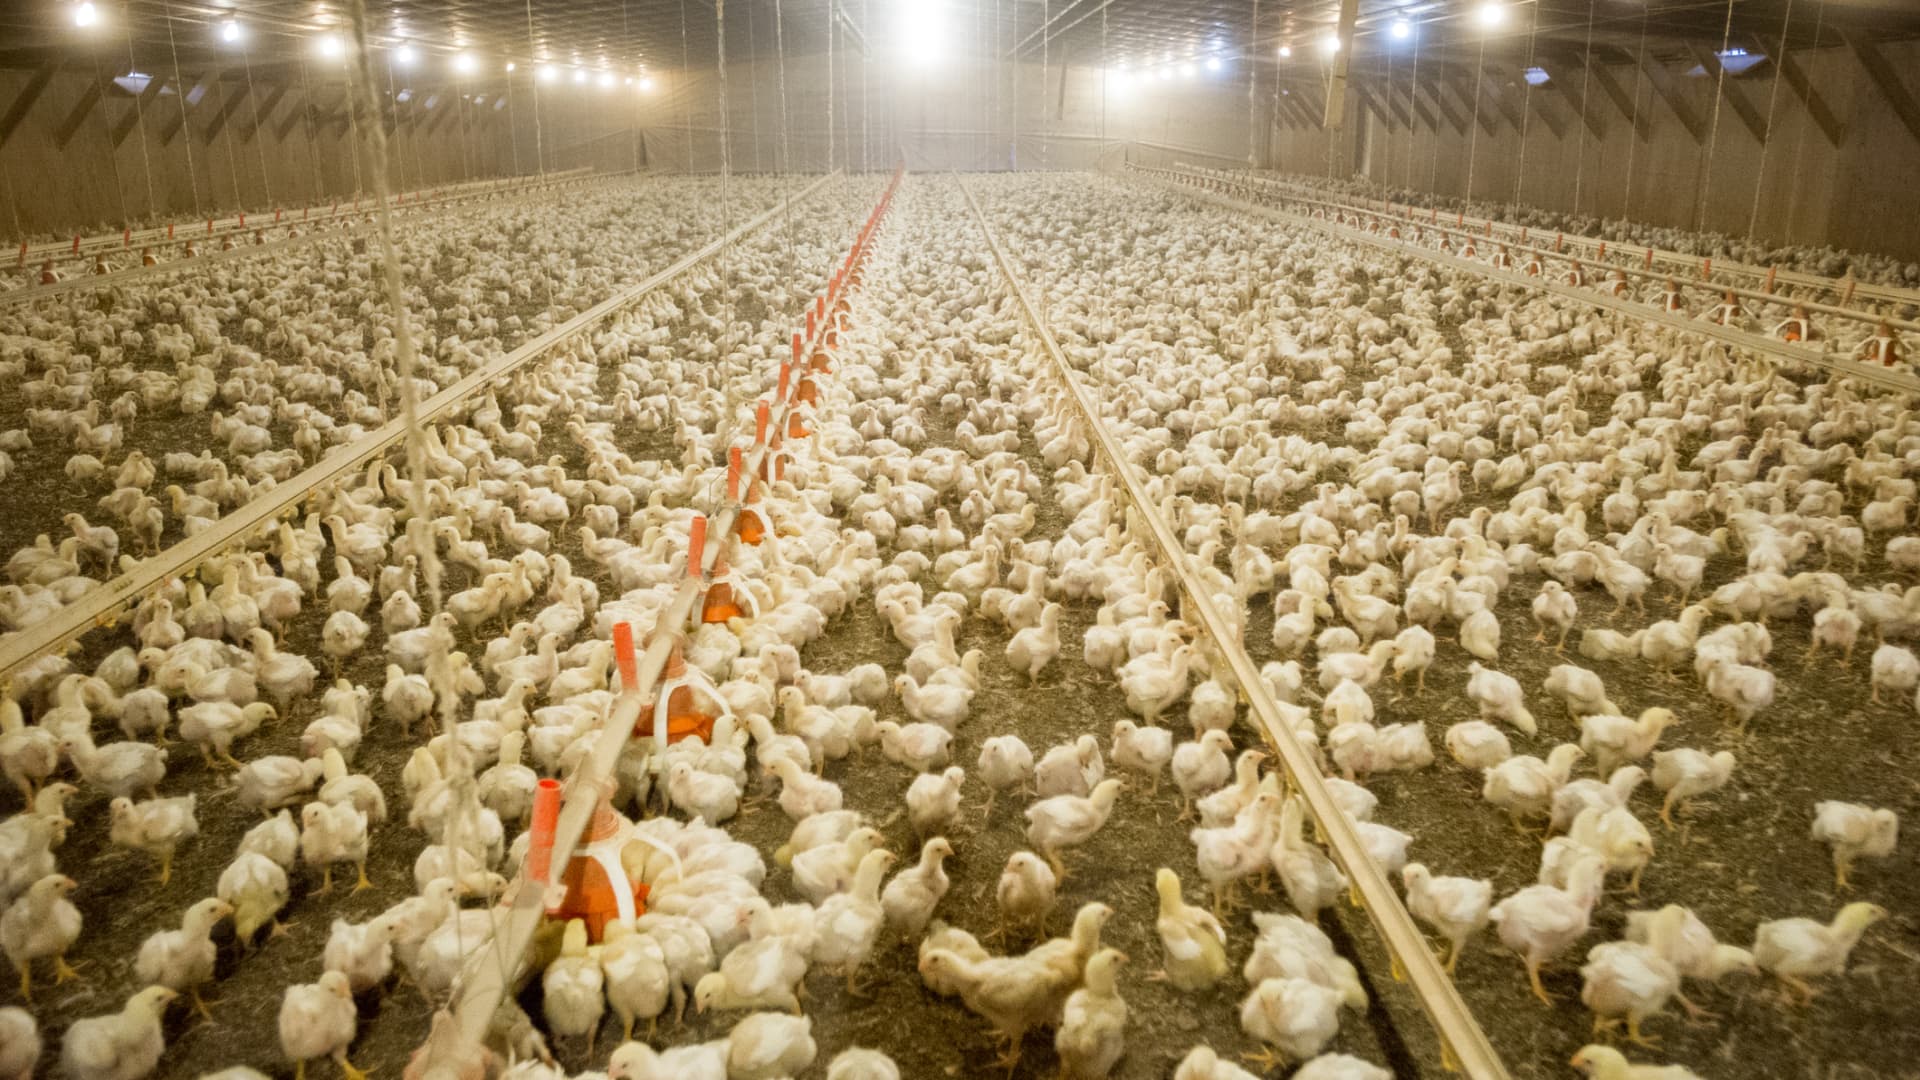 Flock of broiler chickens inside a poultry house.